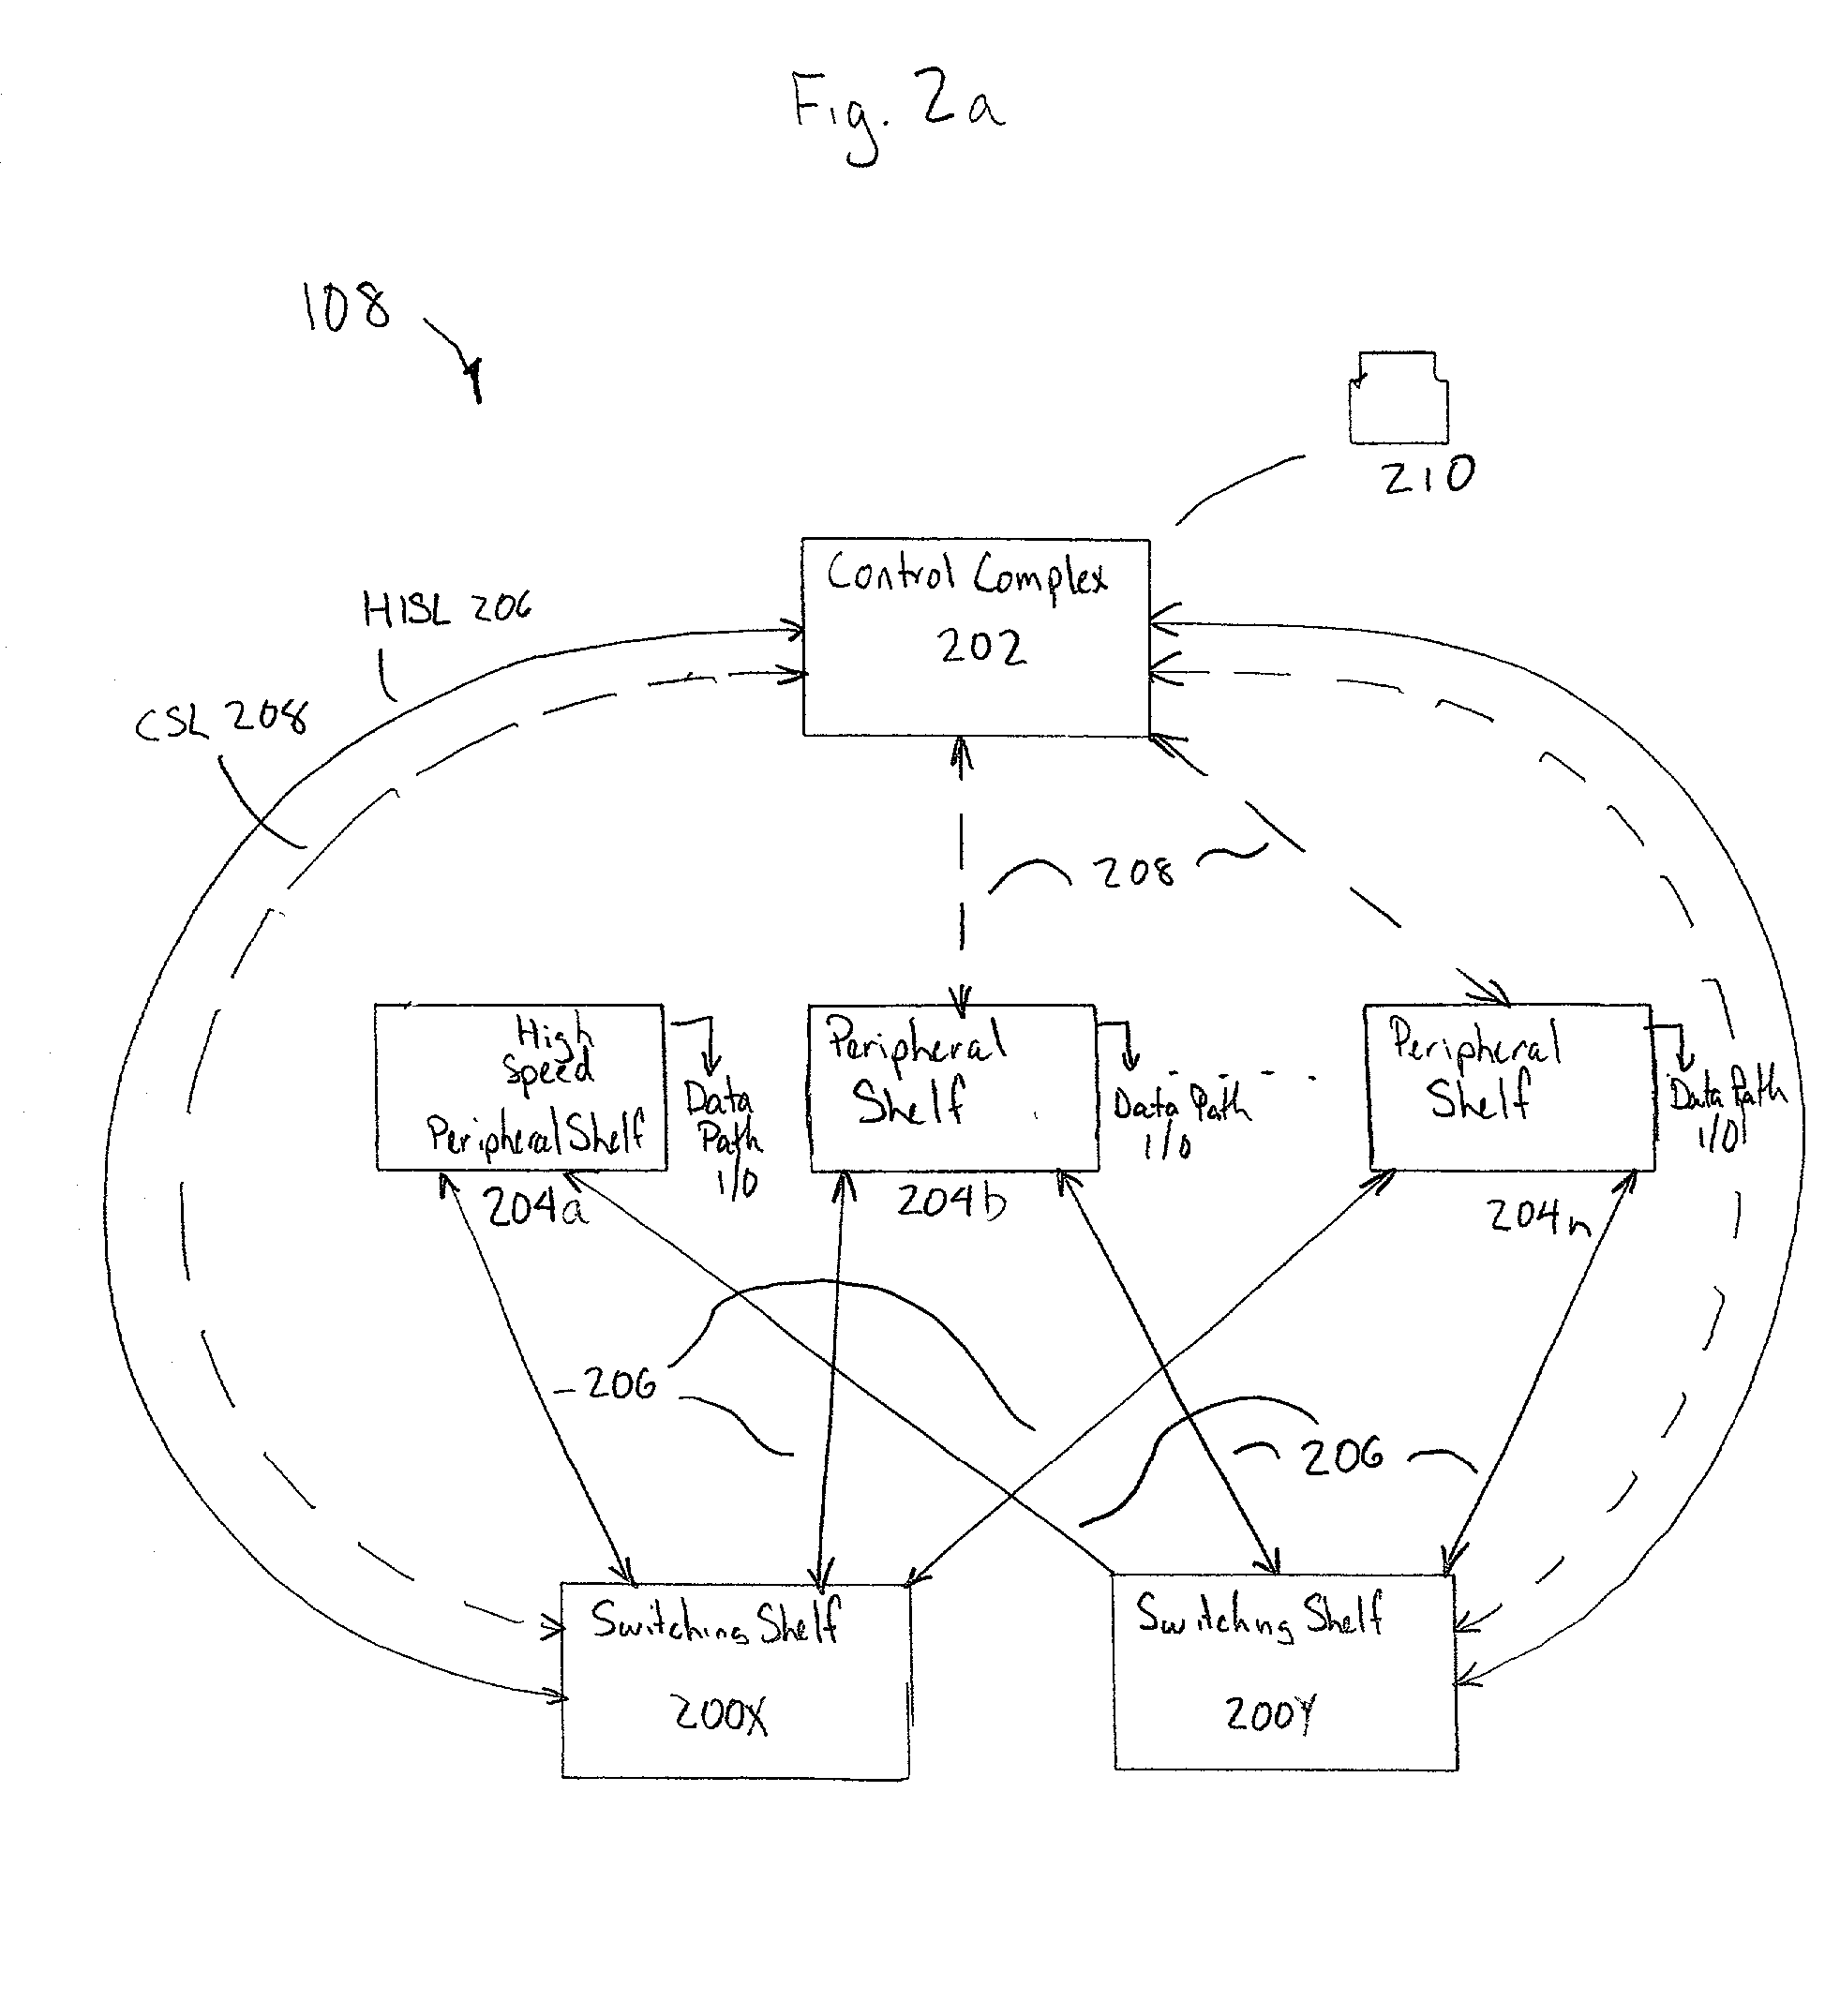 System for providing fabric activity switch control in a communications system